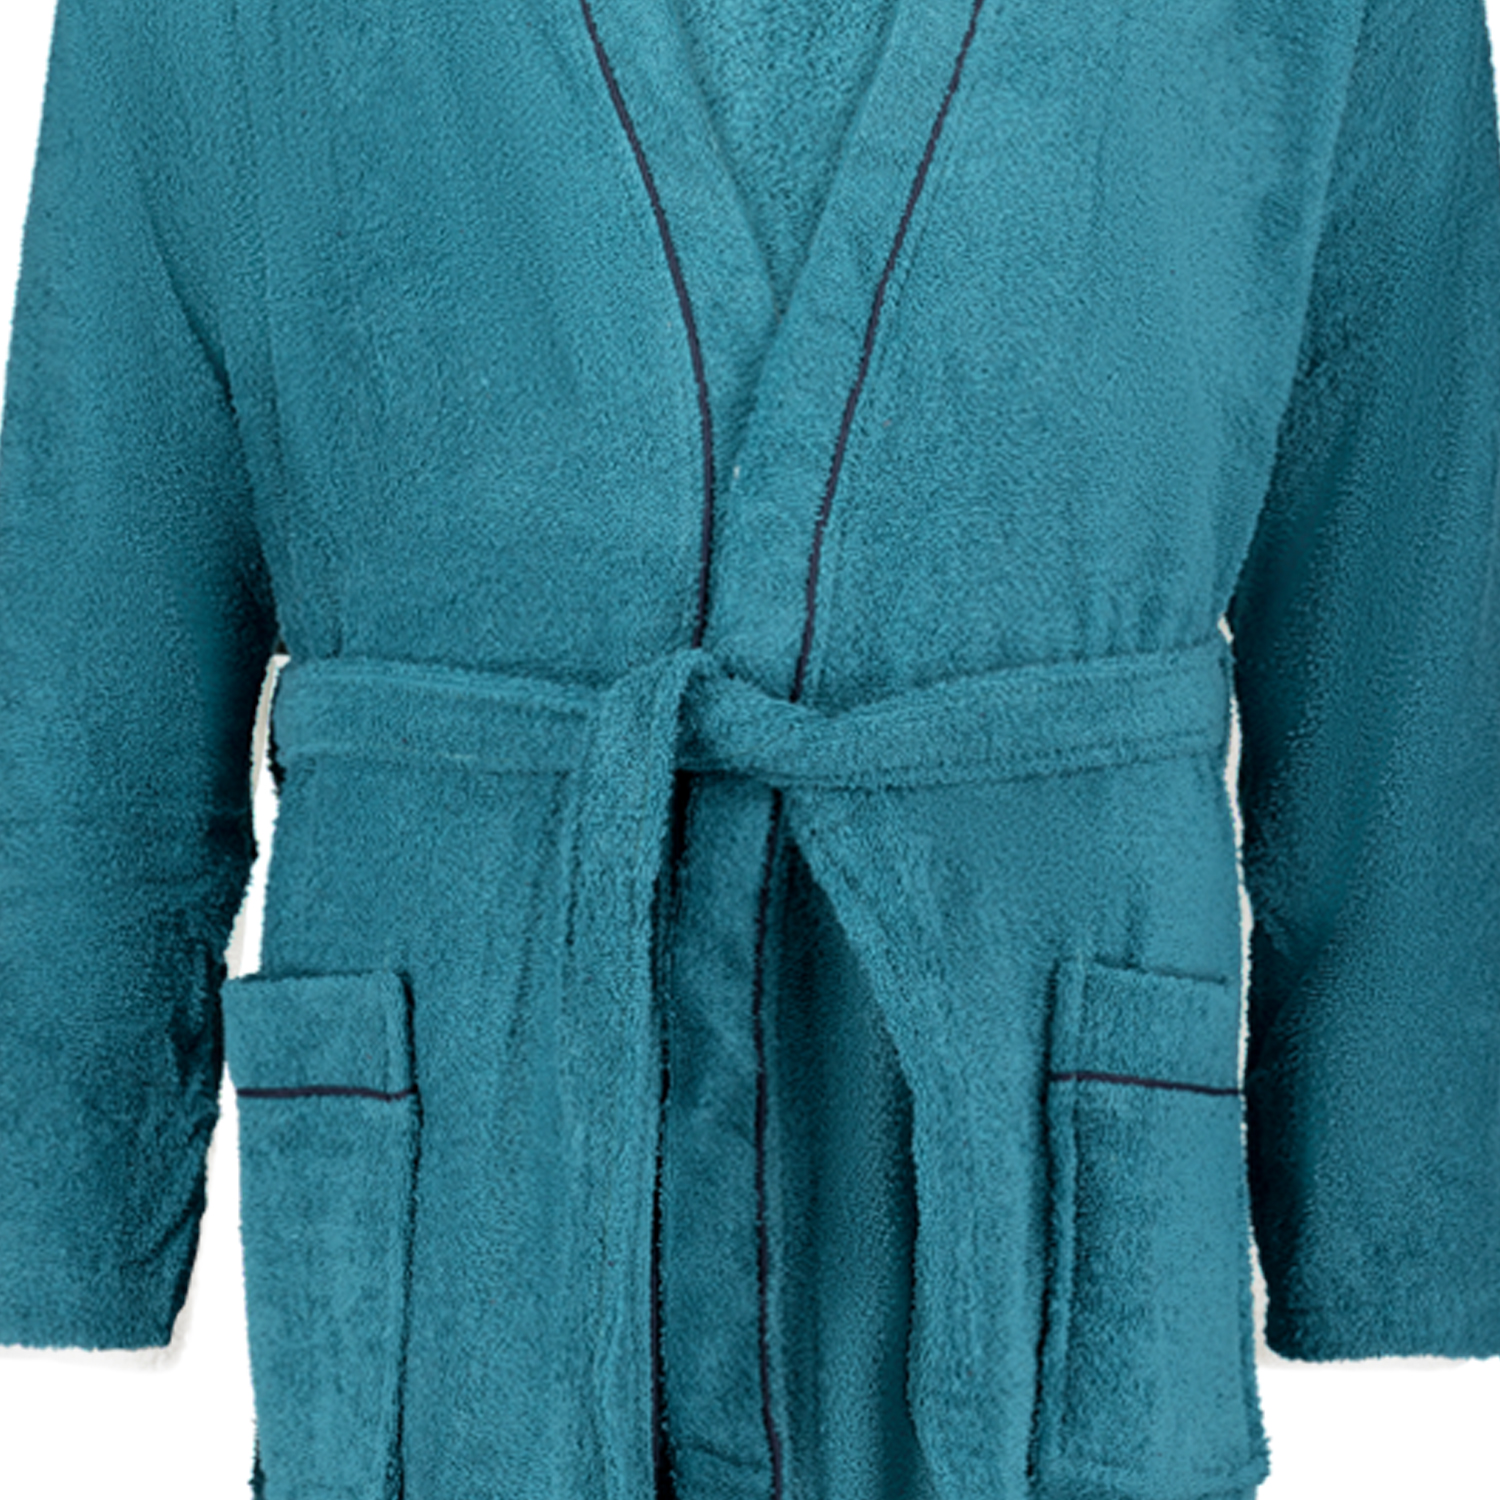 Bathrobe for men TALL FIT in petrol by ADAMO series "Jago" in oversizes up to 5XLT